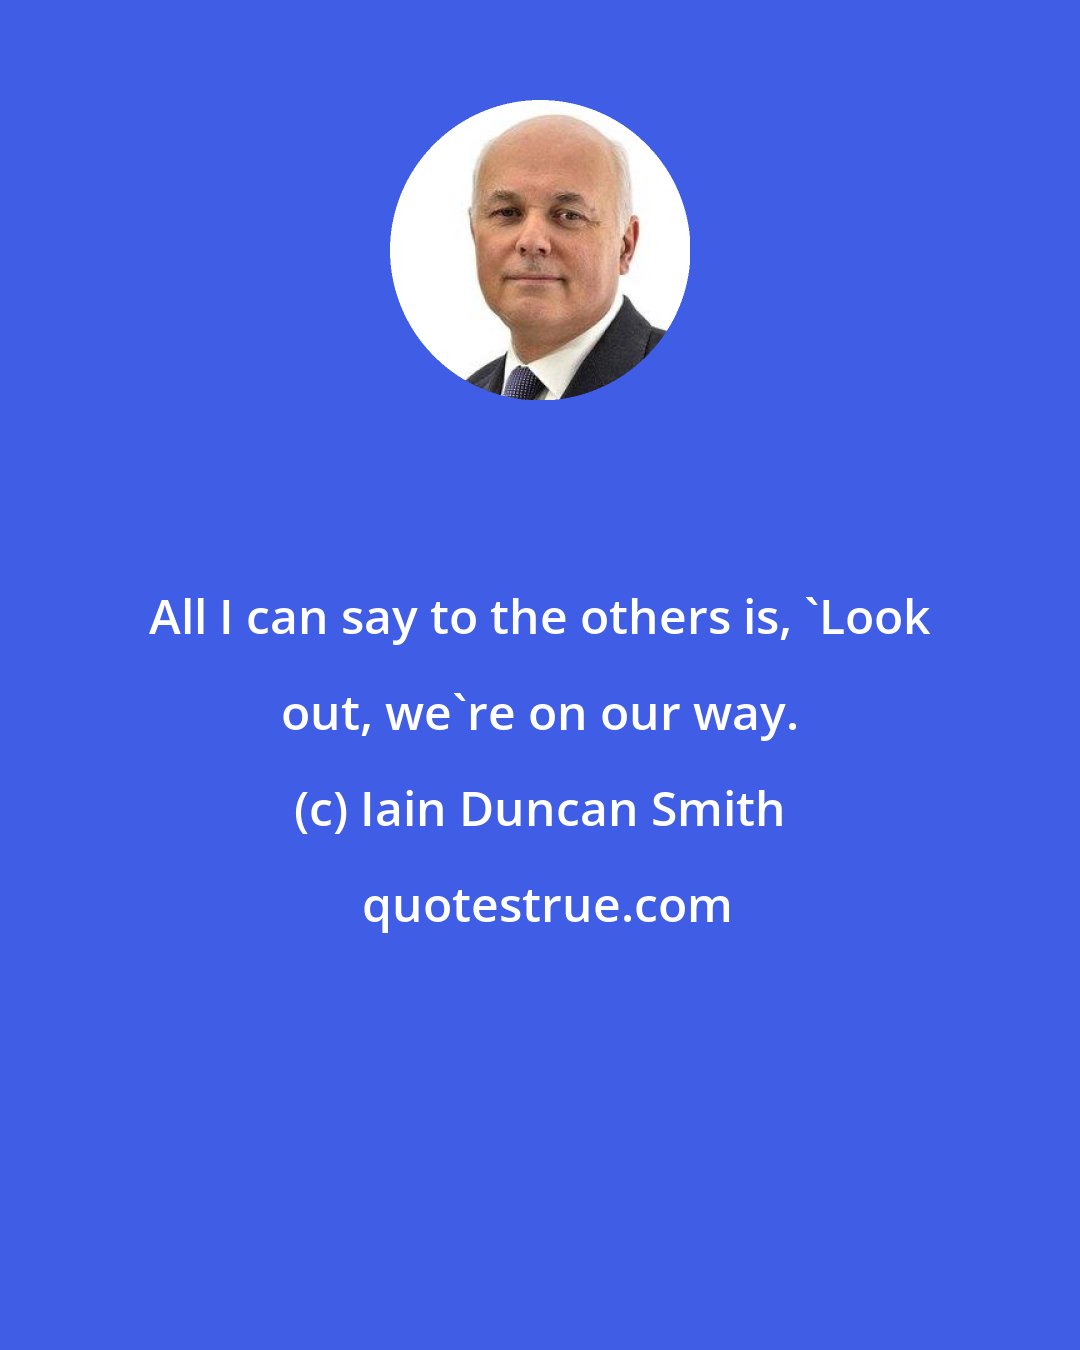 Iain Duncan Smith: All I can say to the others is, 'Look out, we're on our way.